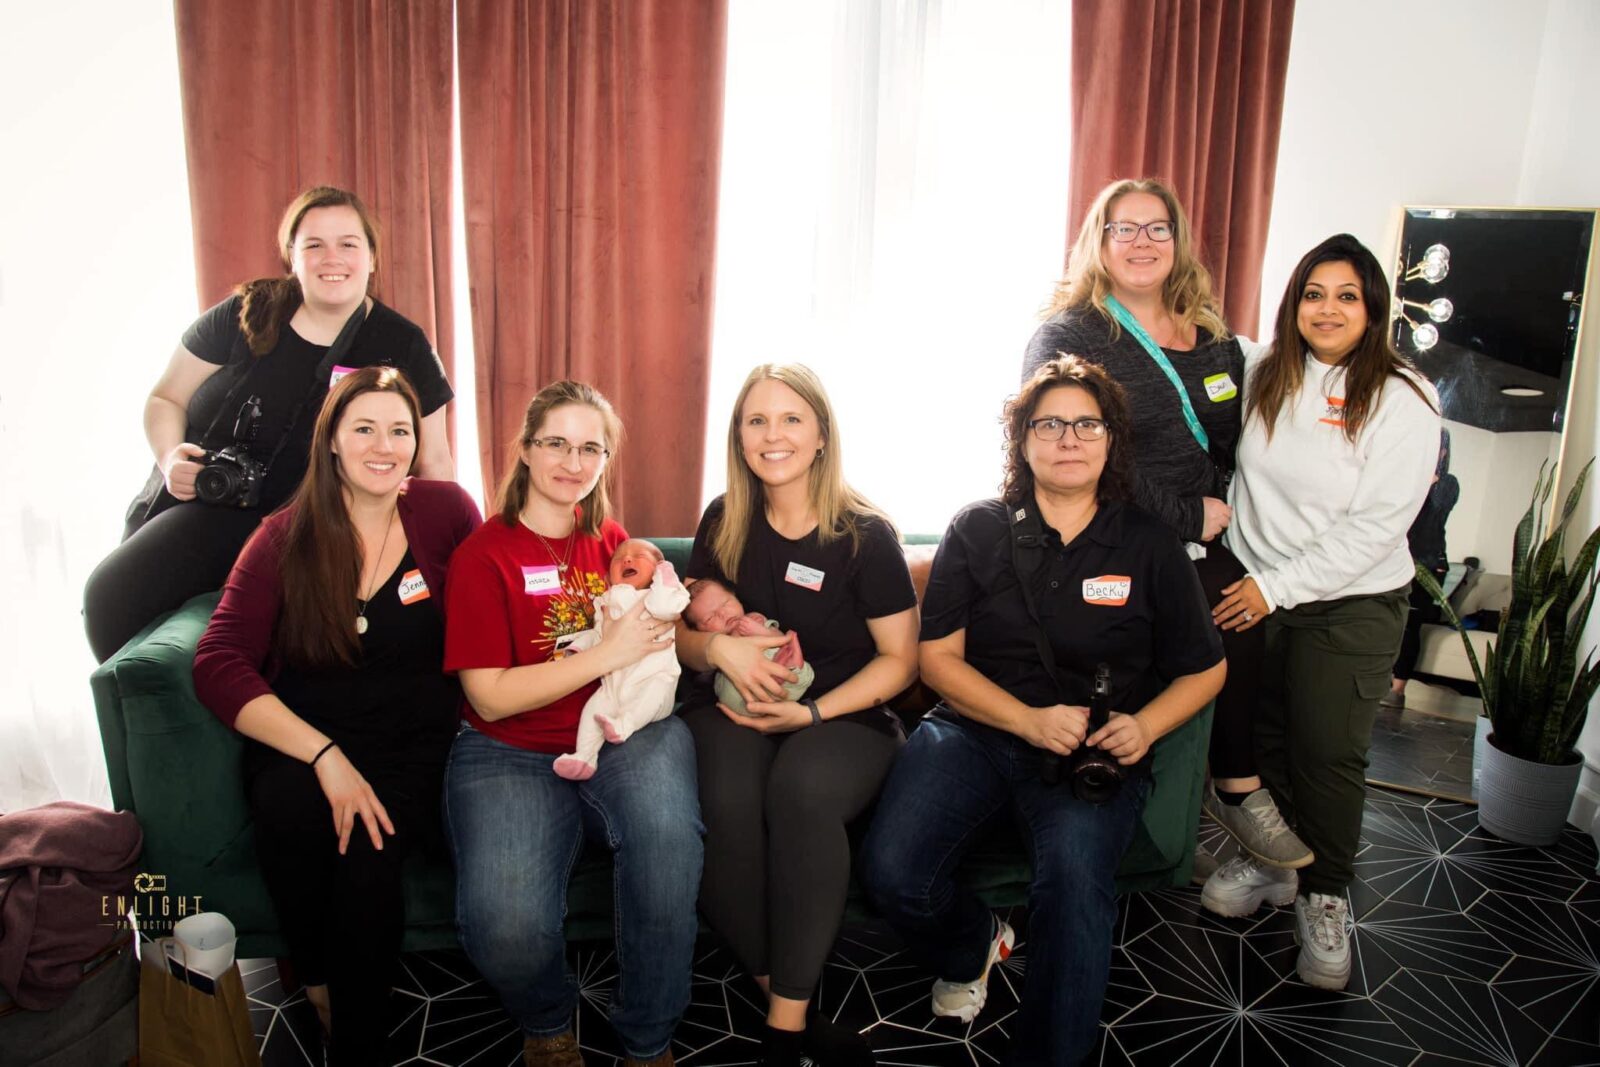 Workshop with newborn photography coach Stacey Ash